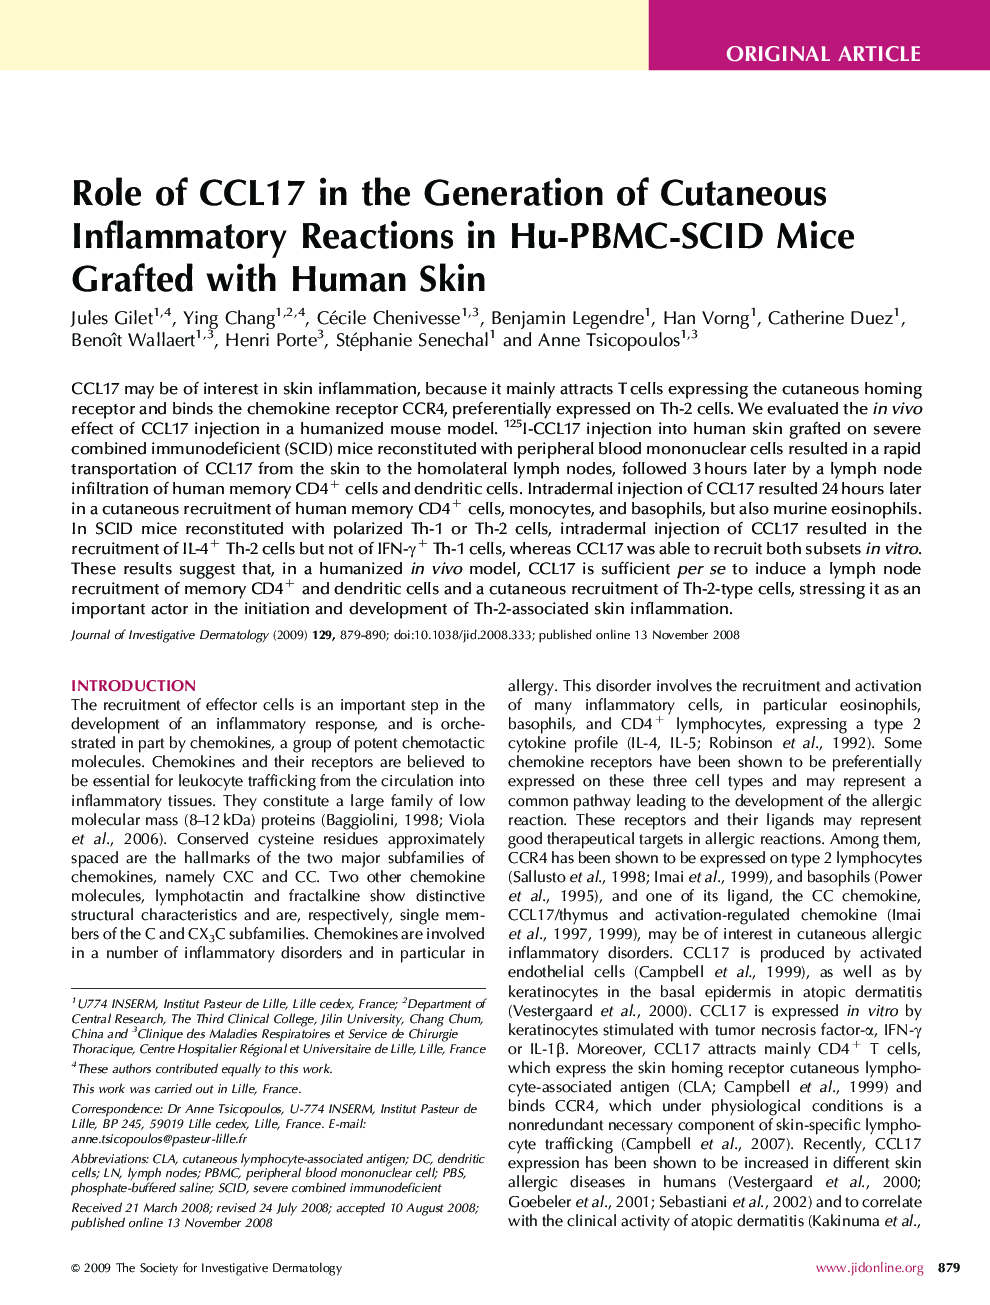 Role of CCL17 in the Generation of Cutaneous Inflammatory Reactions in Hu-PBMC-SCID Mice Grafted with Human Skin 